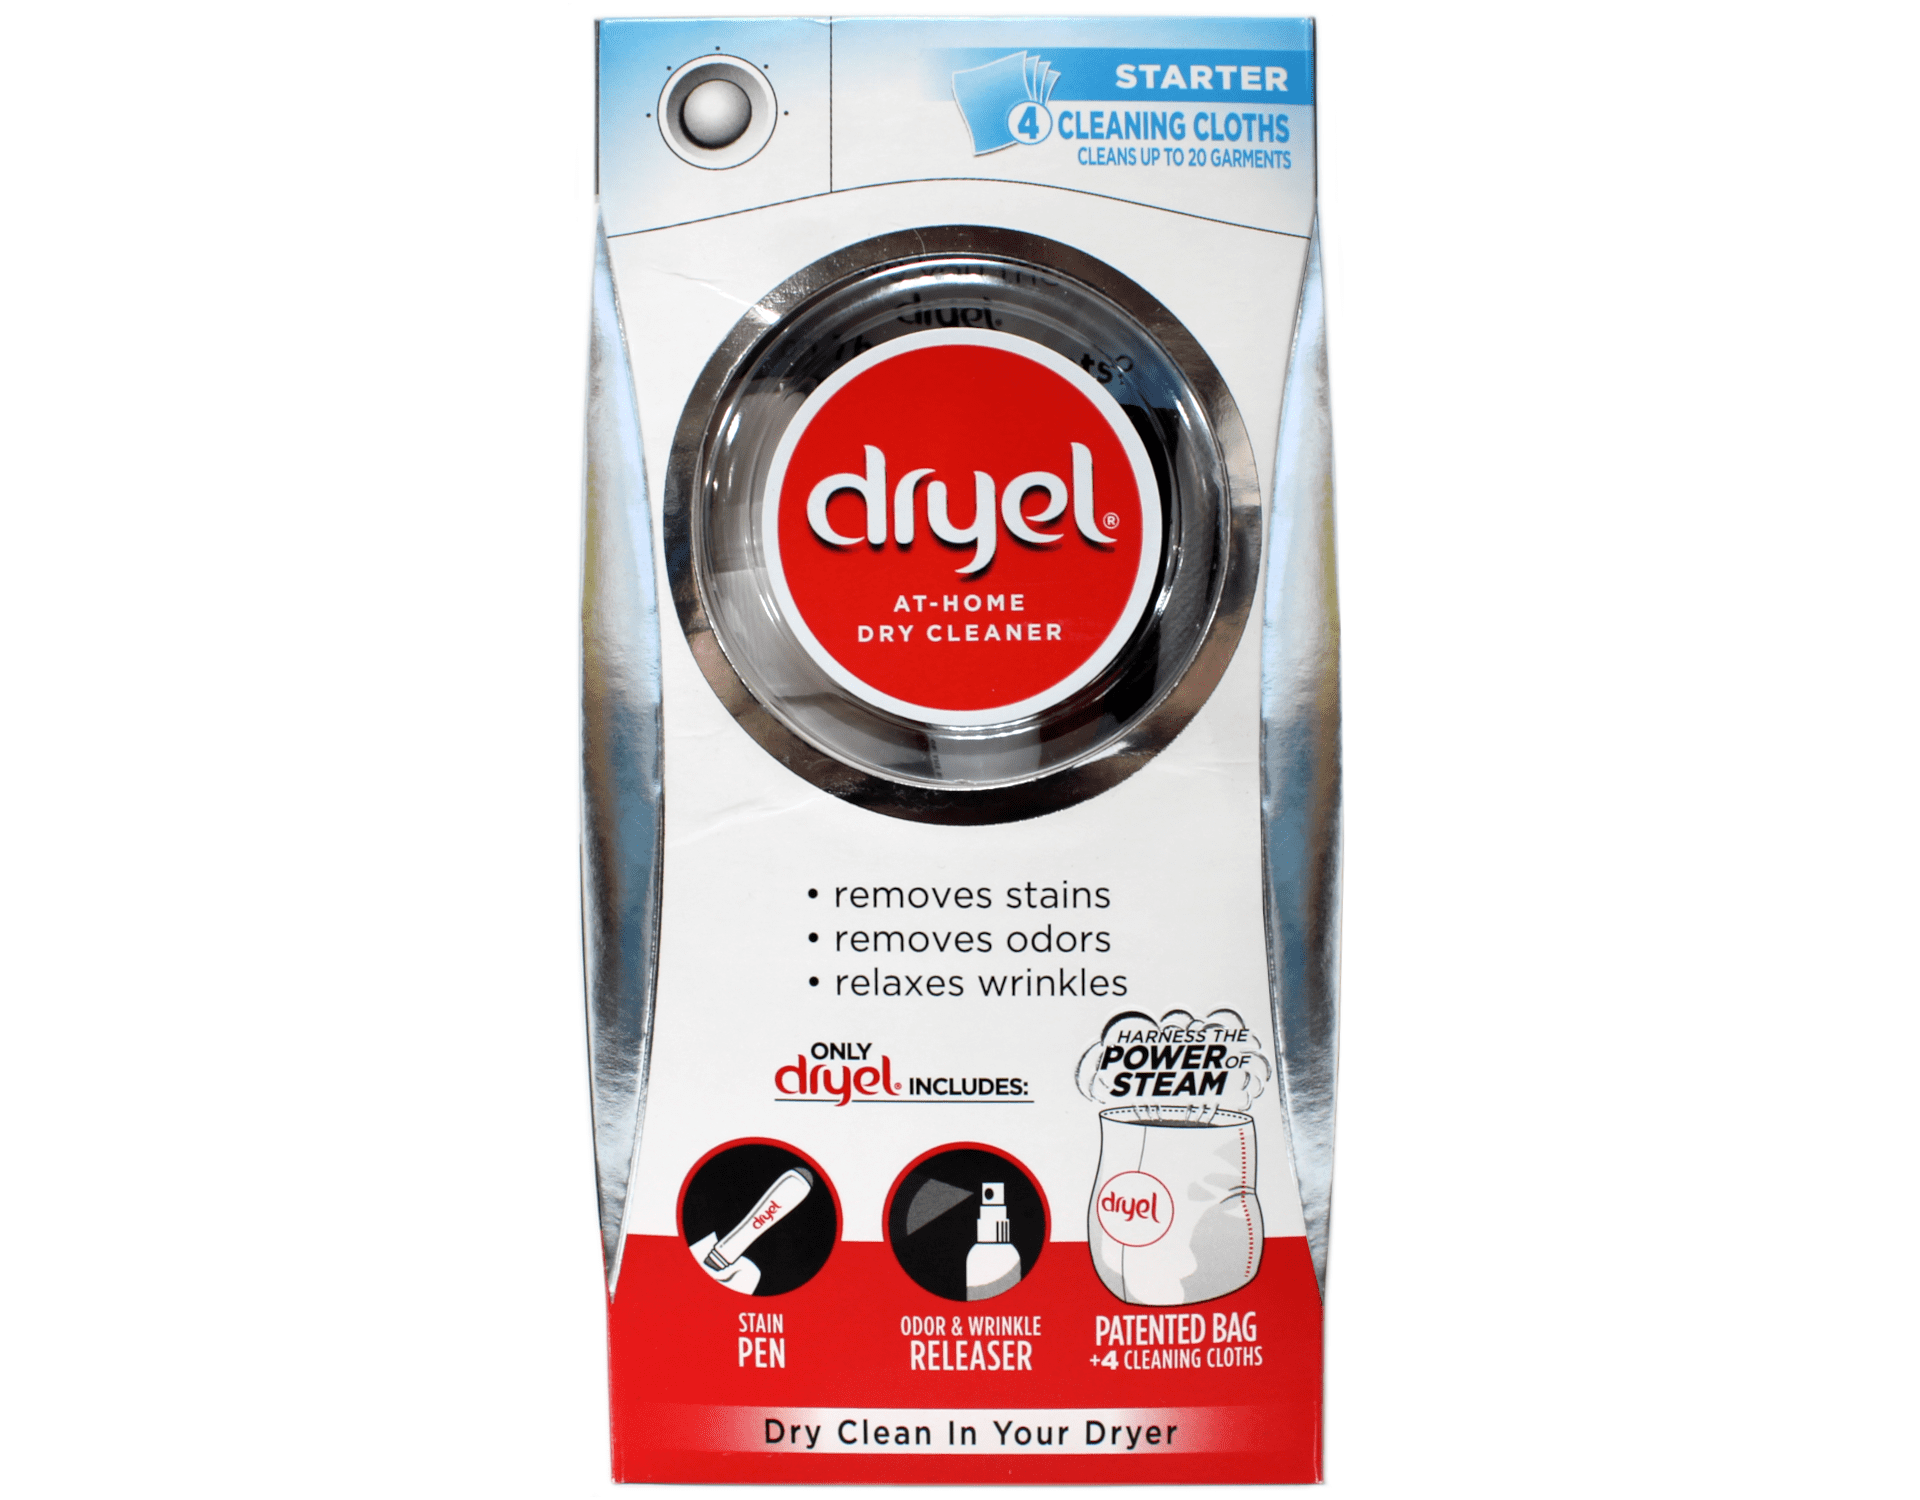 Dryel At-Home Dry Cleaner Refill Kit, 8 Cleaning Cloths, Stain Pen